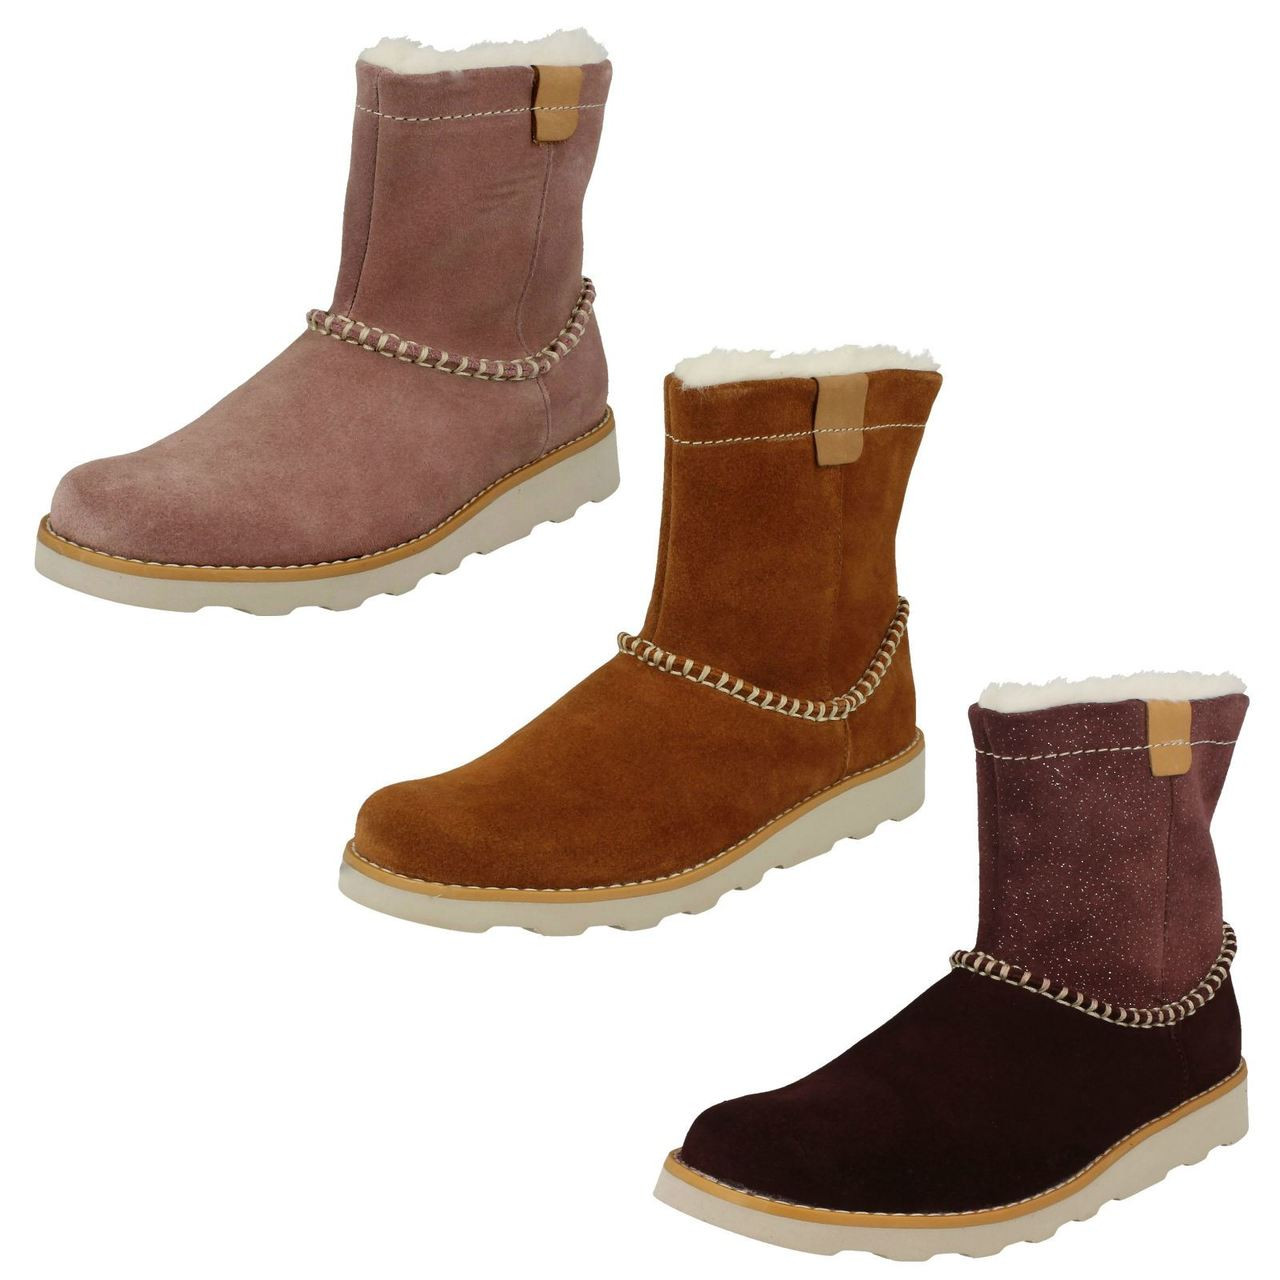 Girls Clarks Casual Fur Lined Boots 